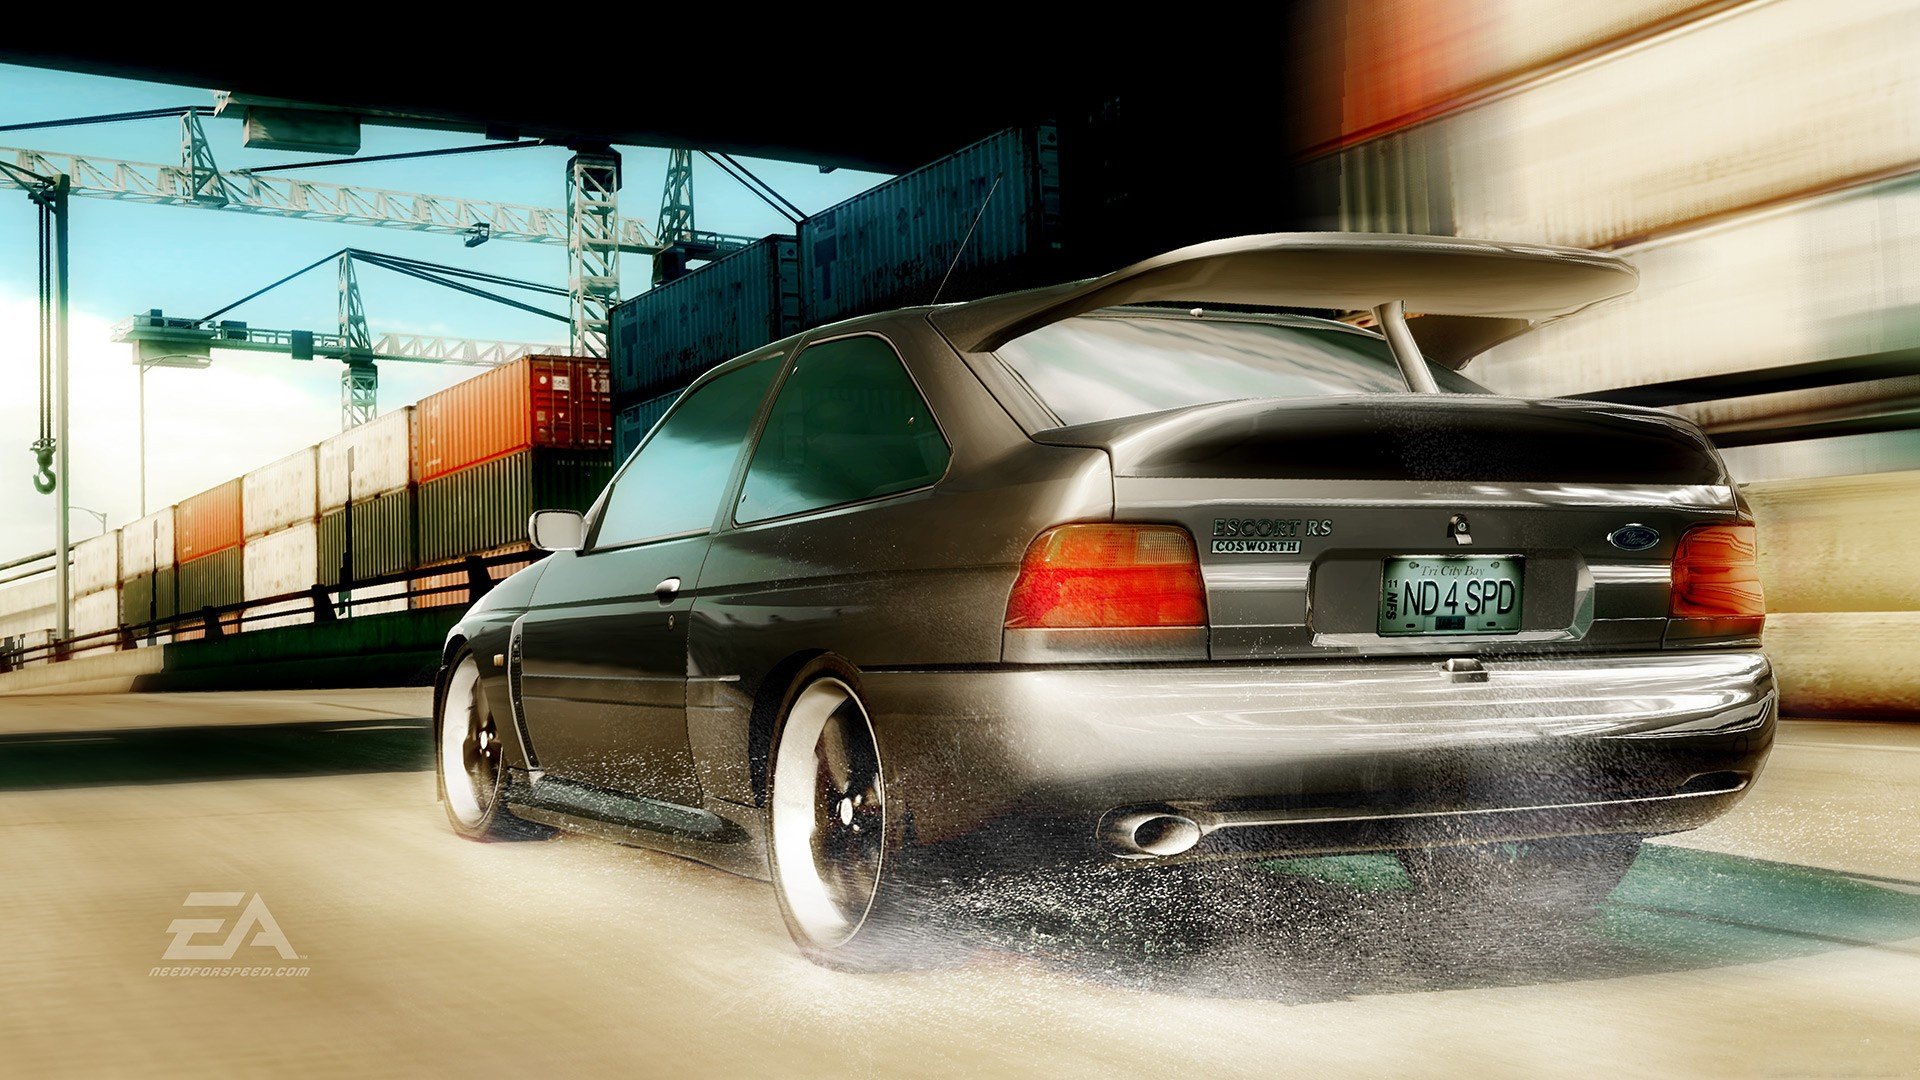 video, Games, Cars, Need, For, Speed, Need, For, Speed, Undercover, Ford, Escort, Games, Pc, Games Wallpaper